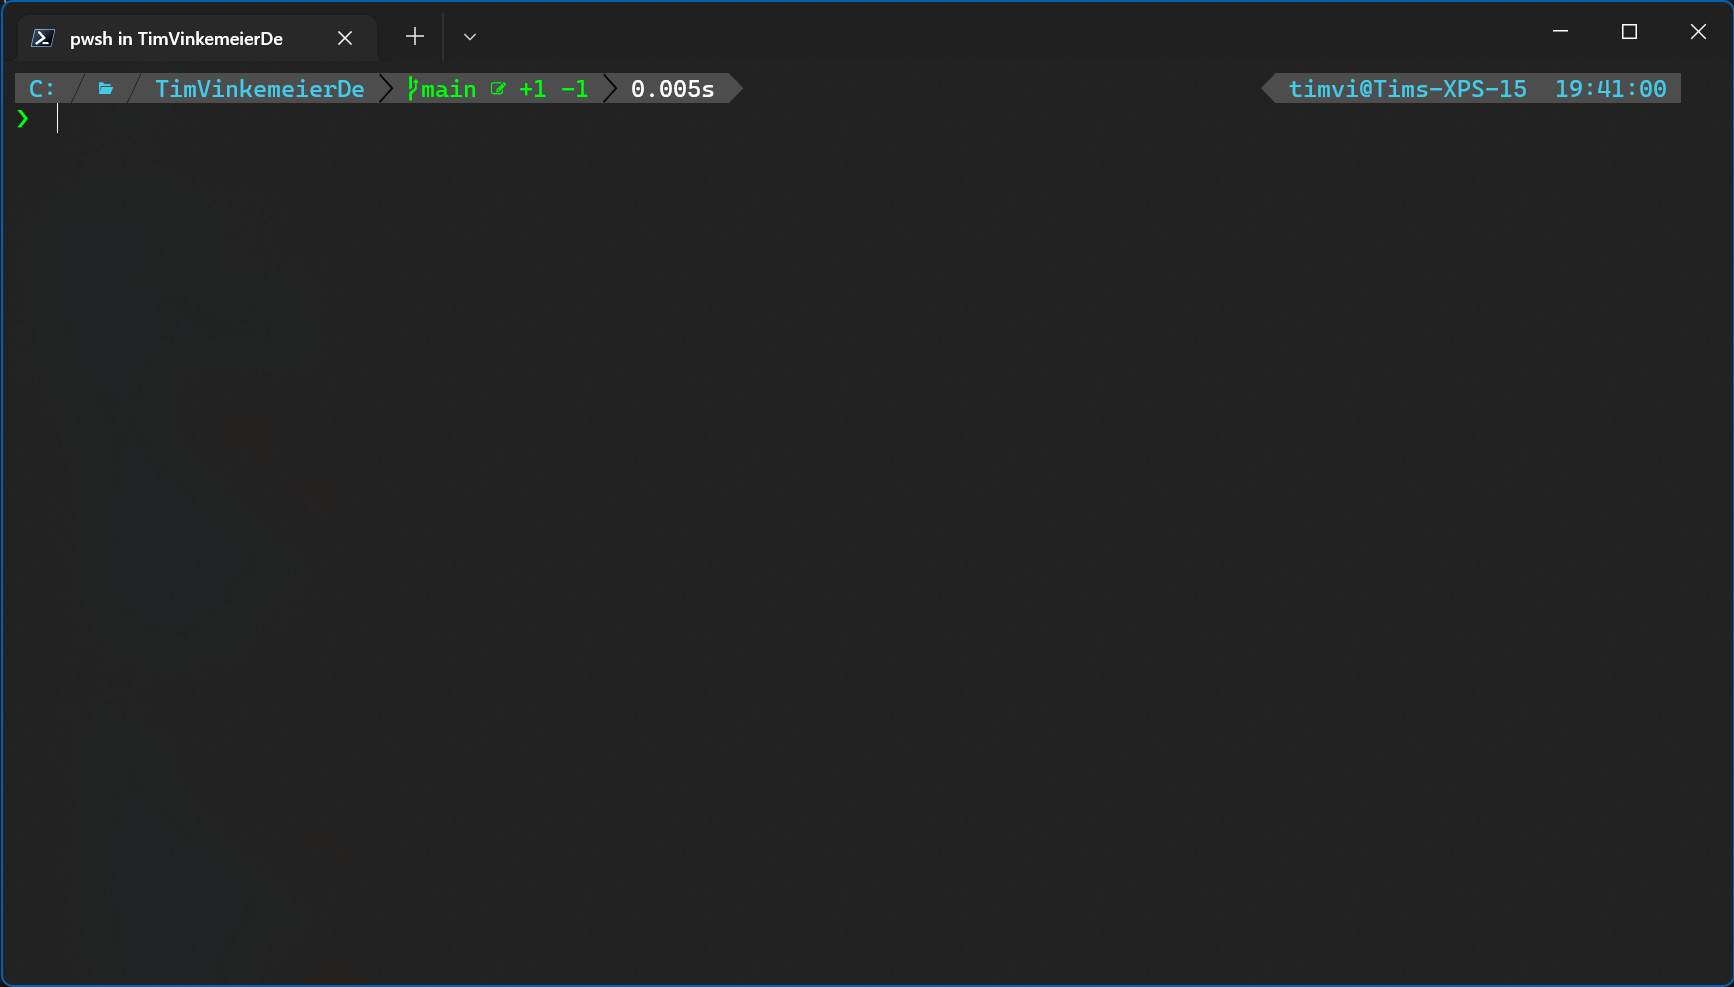 Result of my configuration in Windows Terminal Preview